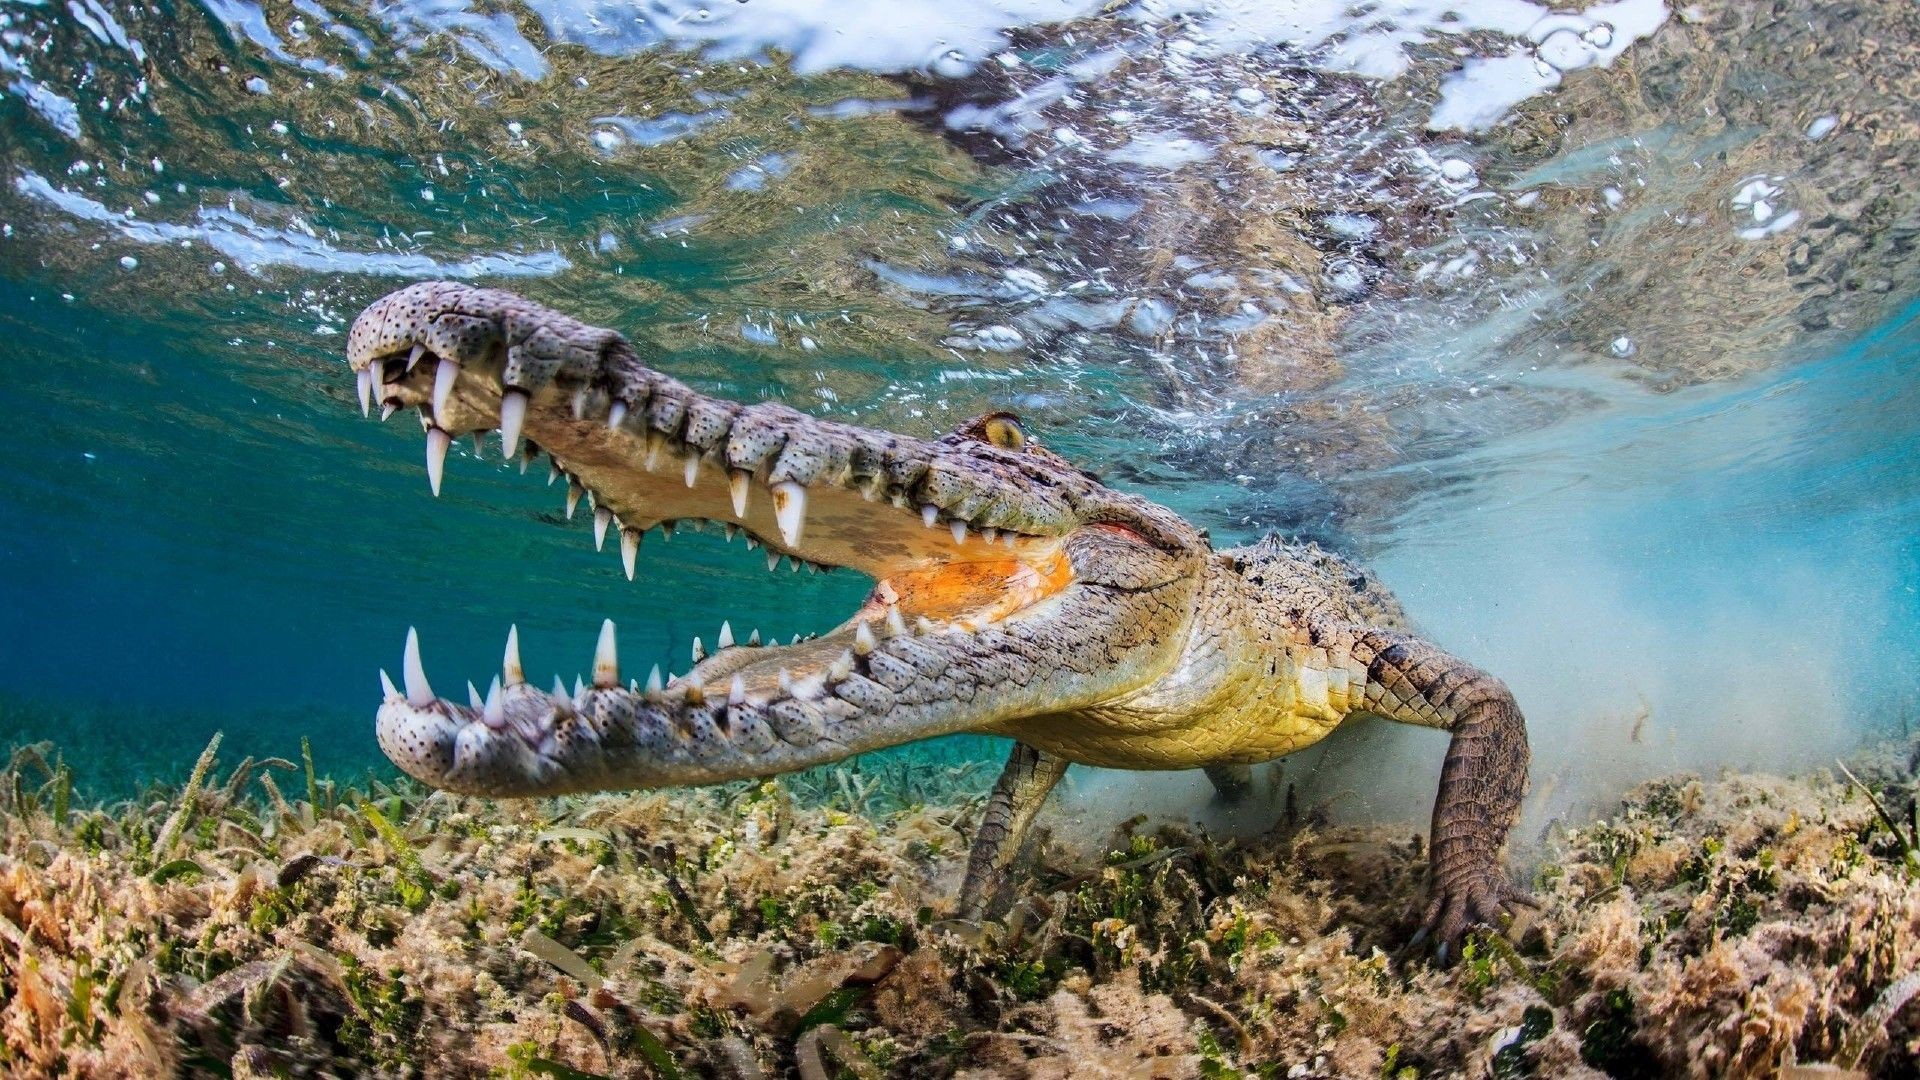 General 1920x1080 nature animals muzzles fangs underwater water reptiles wildlife fisheye lens bubbles turquoise crocodiles